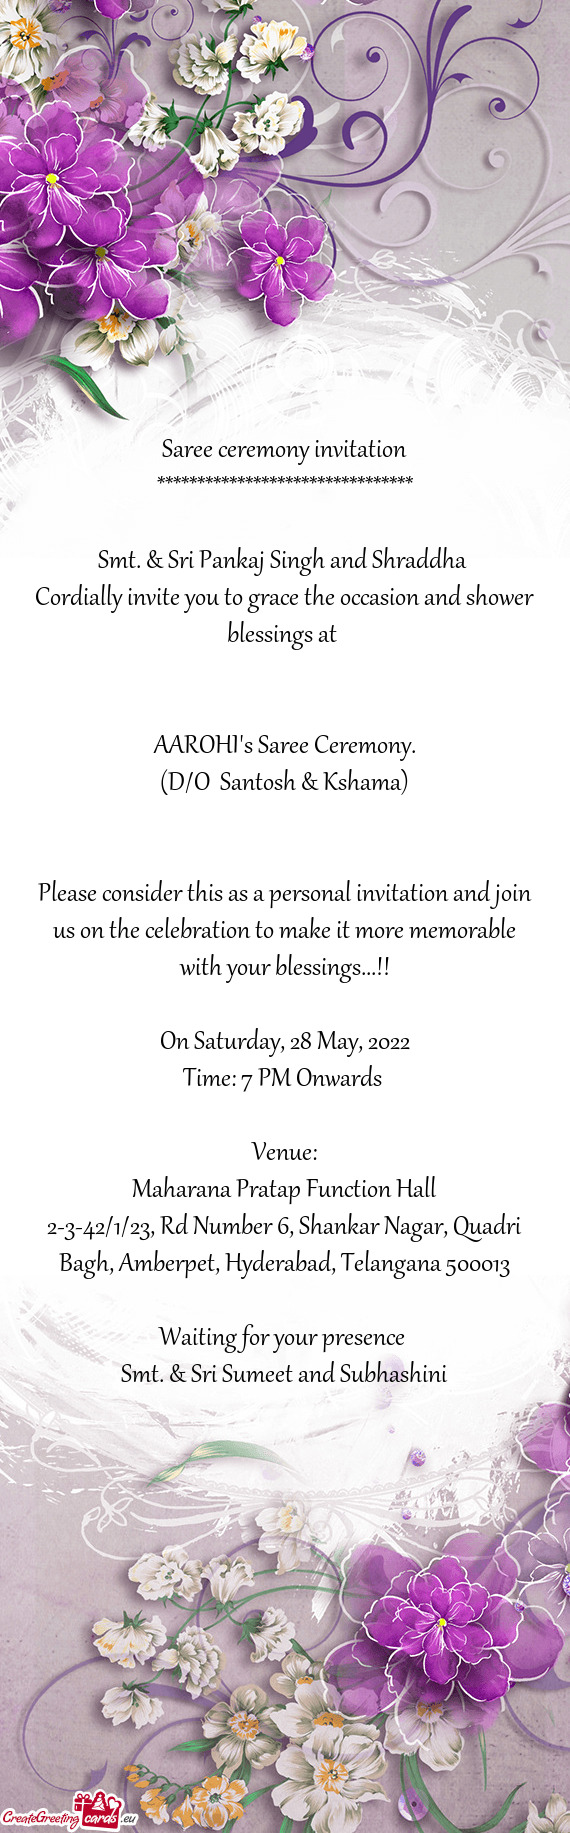 Cordially invite you to grace the occasion and shower blessings at